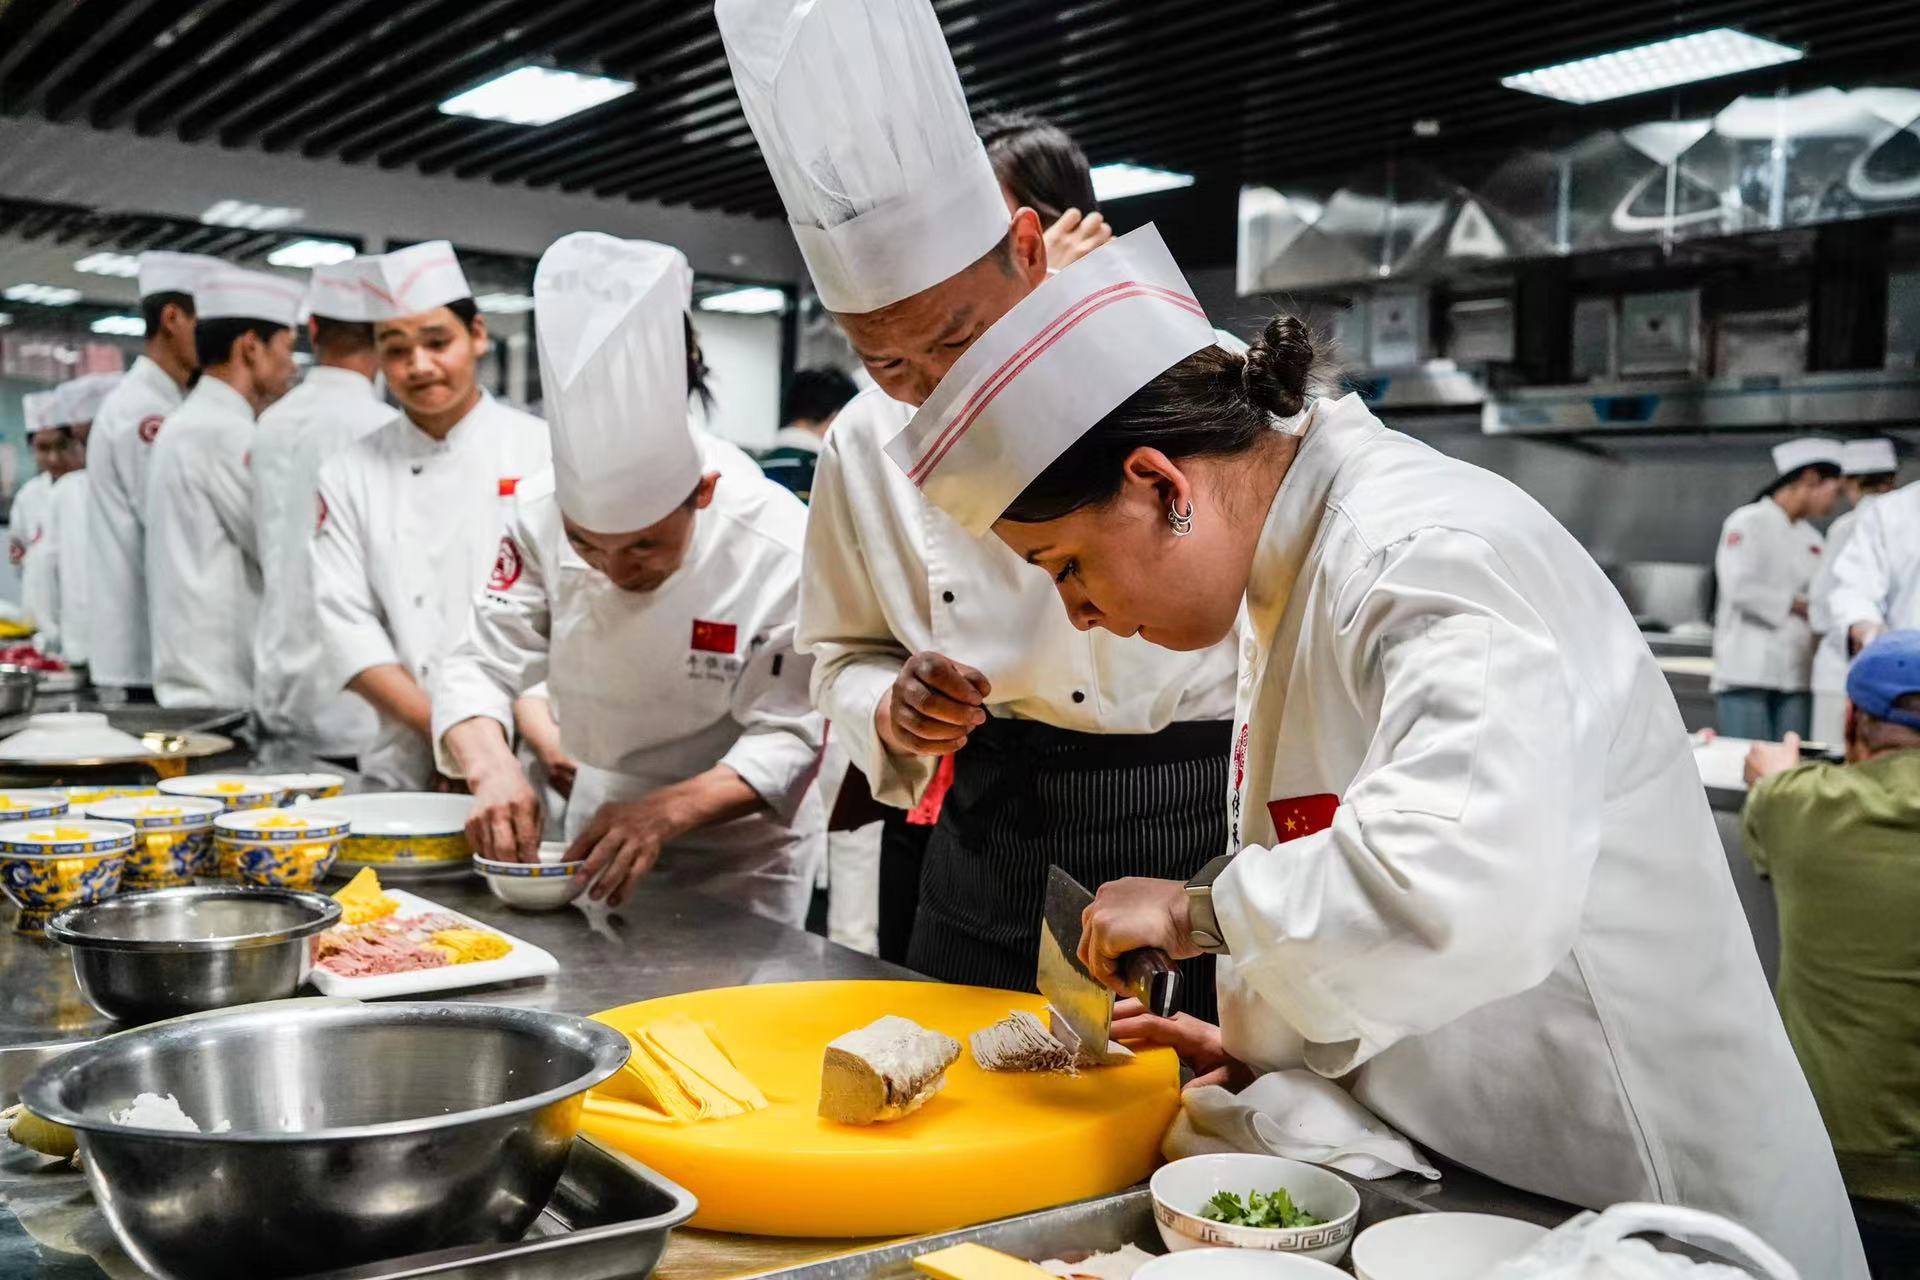 International students invited to experience traditional food culture in Henan